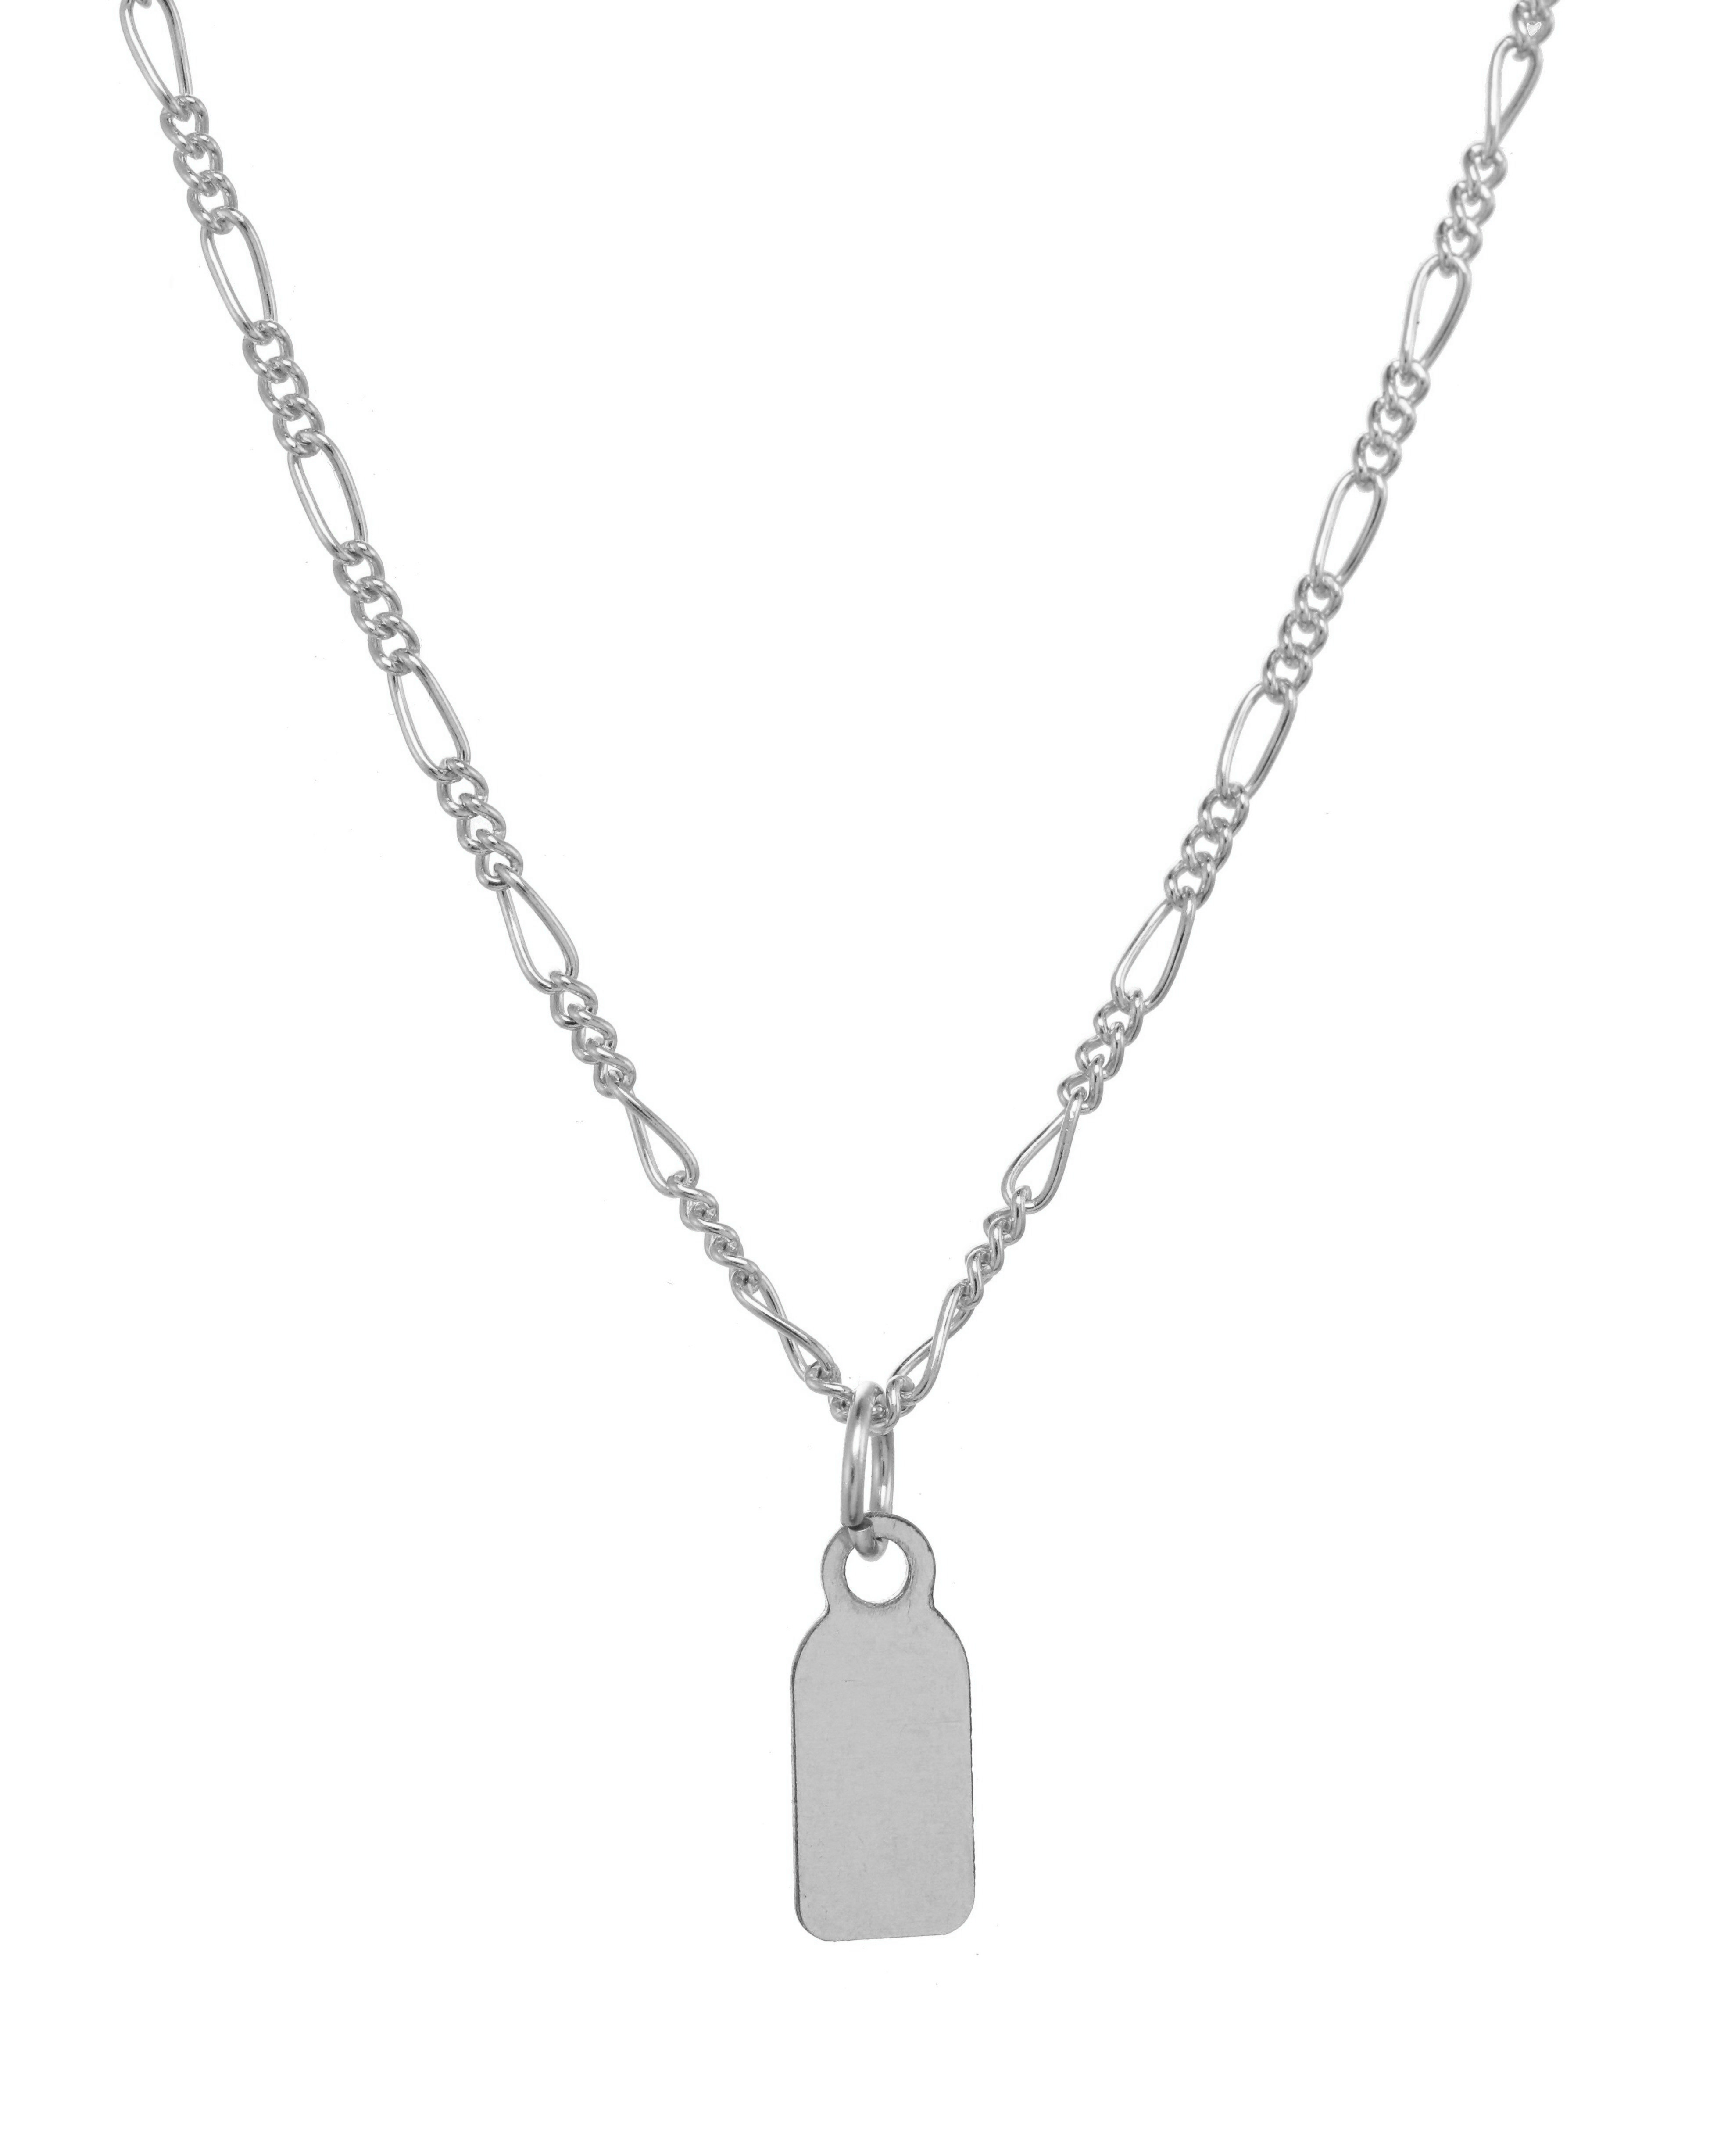 Chetta Necklace by KOZAKH. A 16 inch long necklace in Sterling Silver, featuring a tag charm.